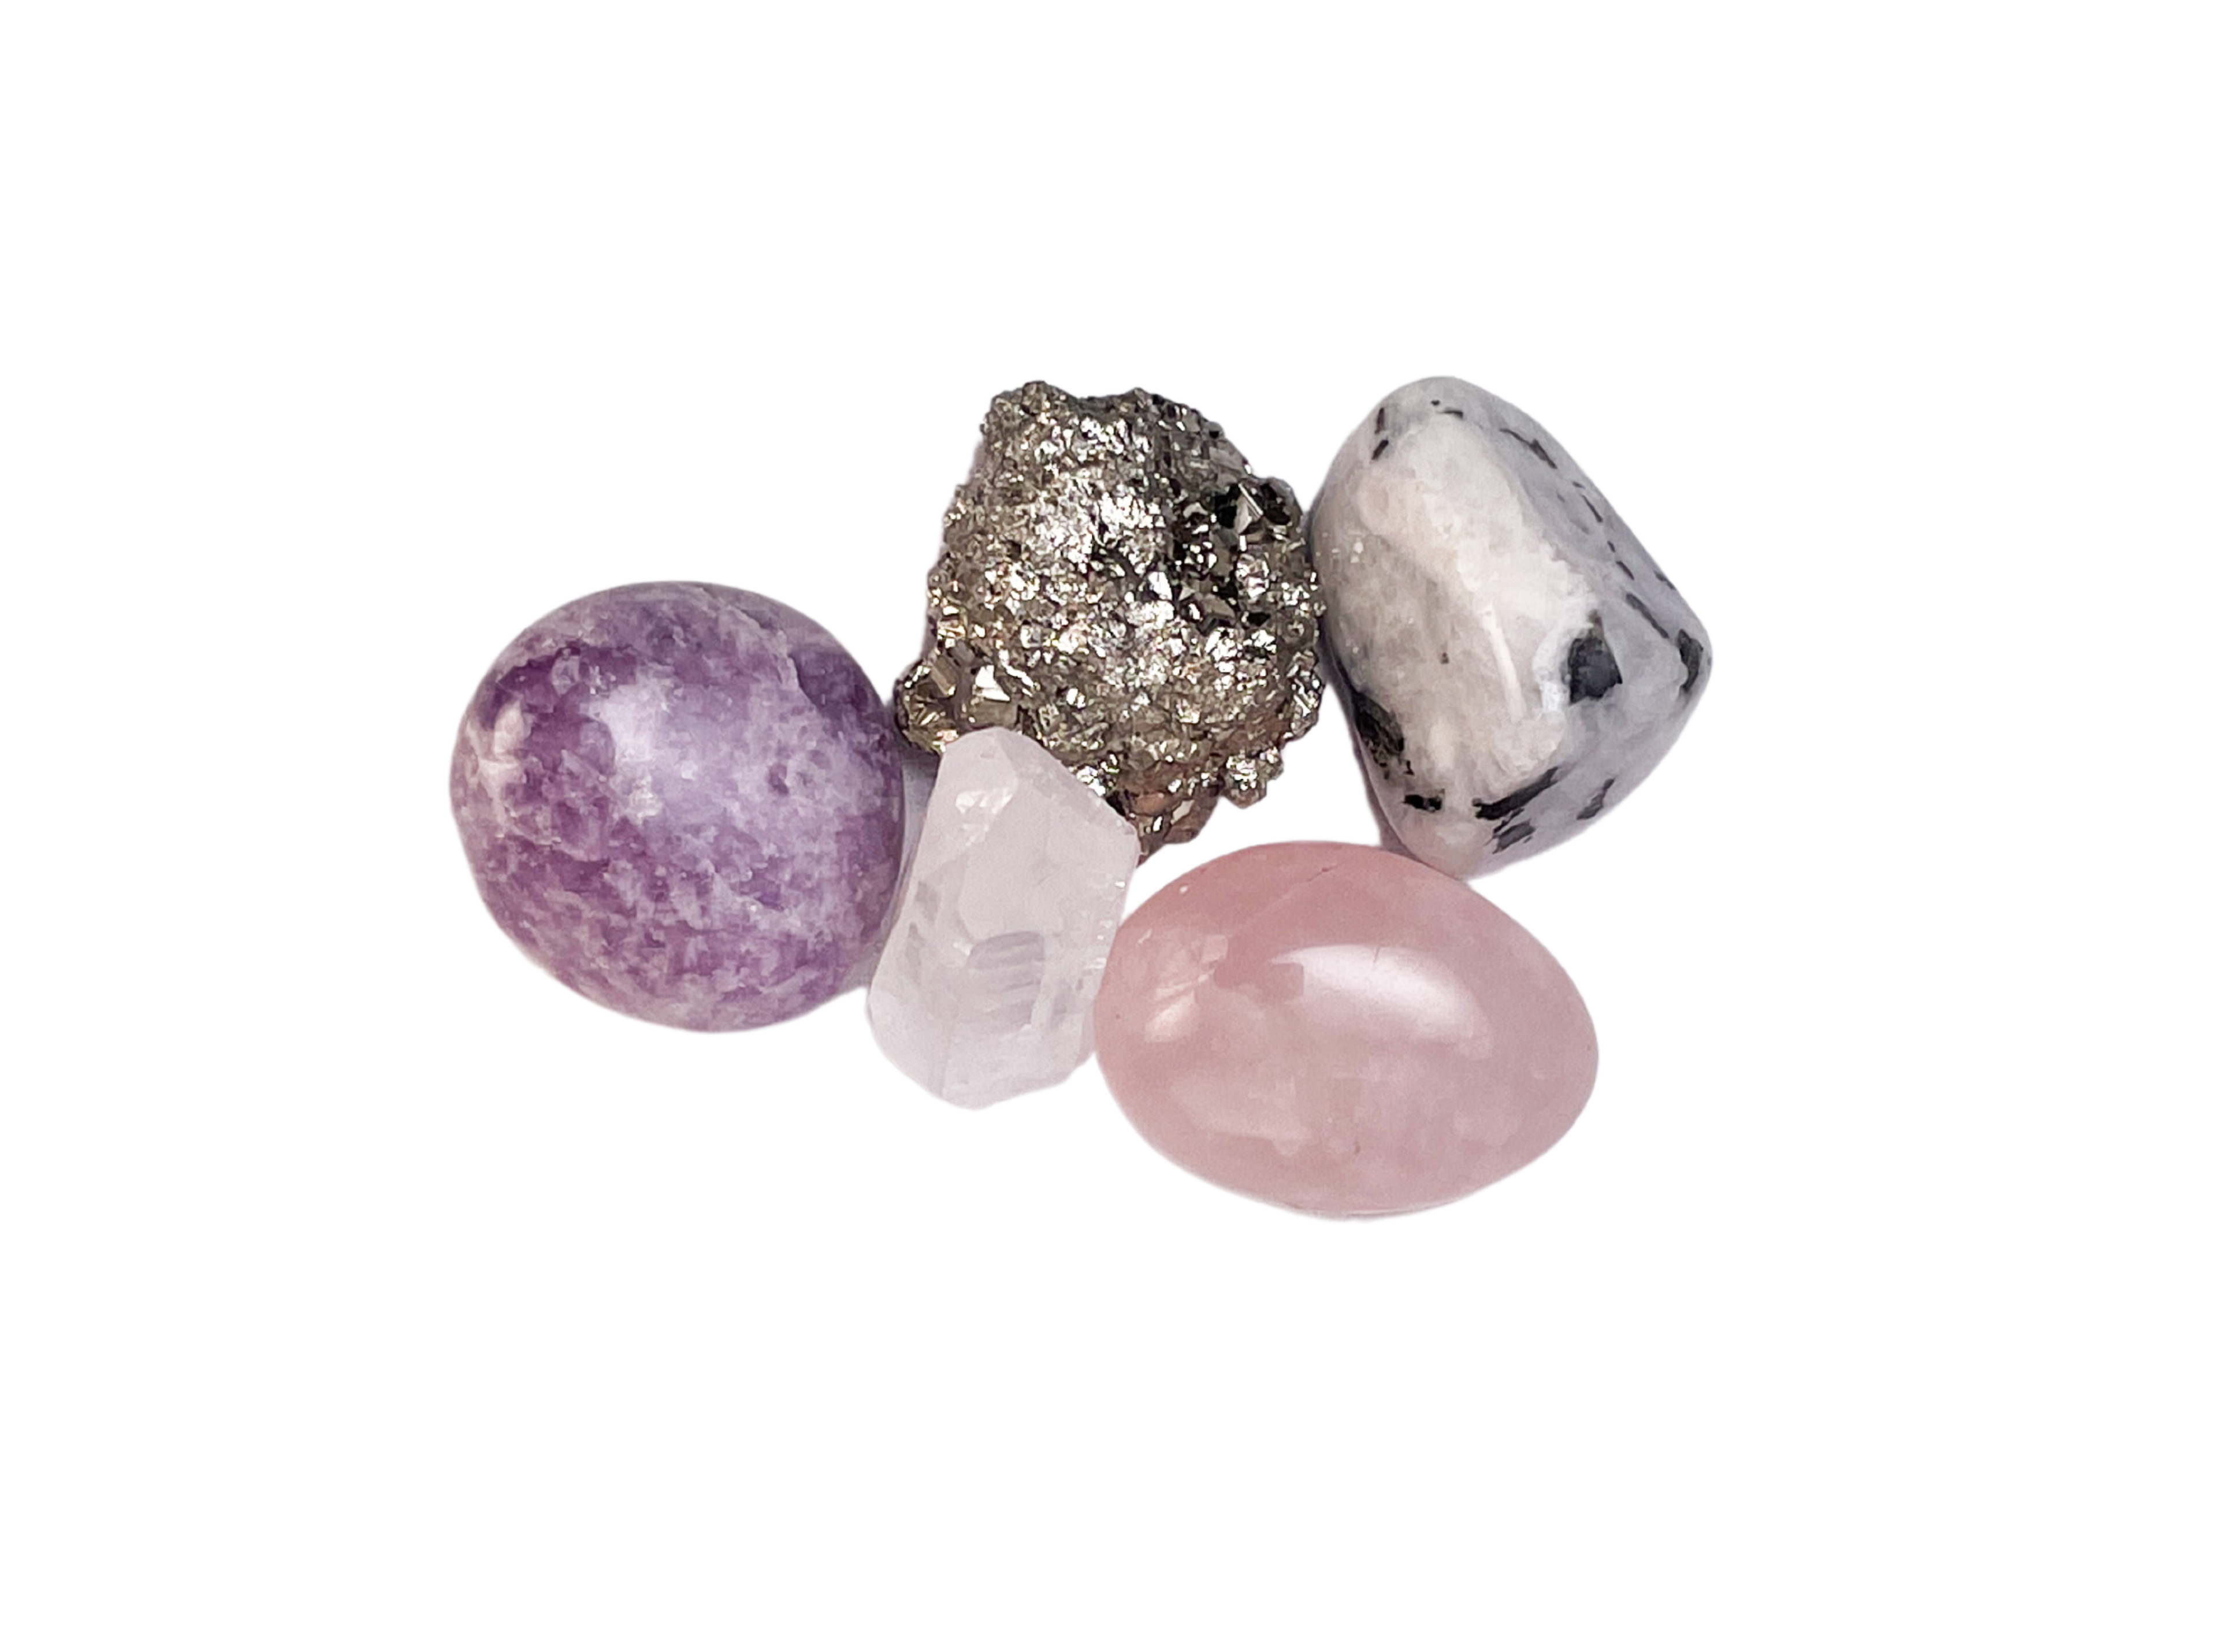 Buy Online Latest and Unique Grief & Loss Crystals Pocket Bundle | Shop Best Spiritual Items - The Mystical Ritual